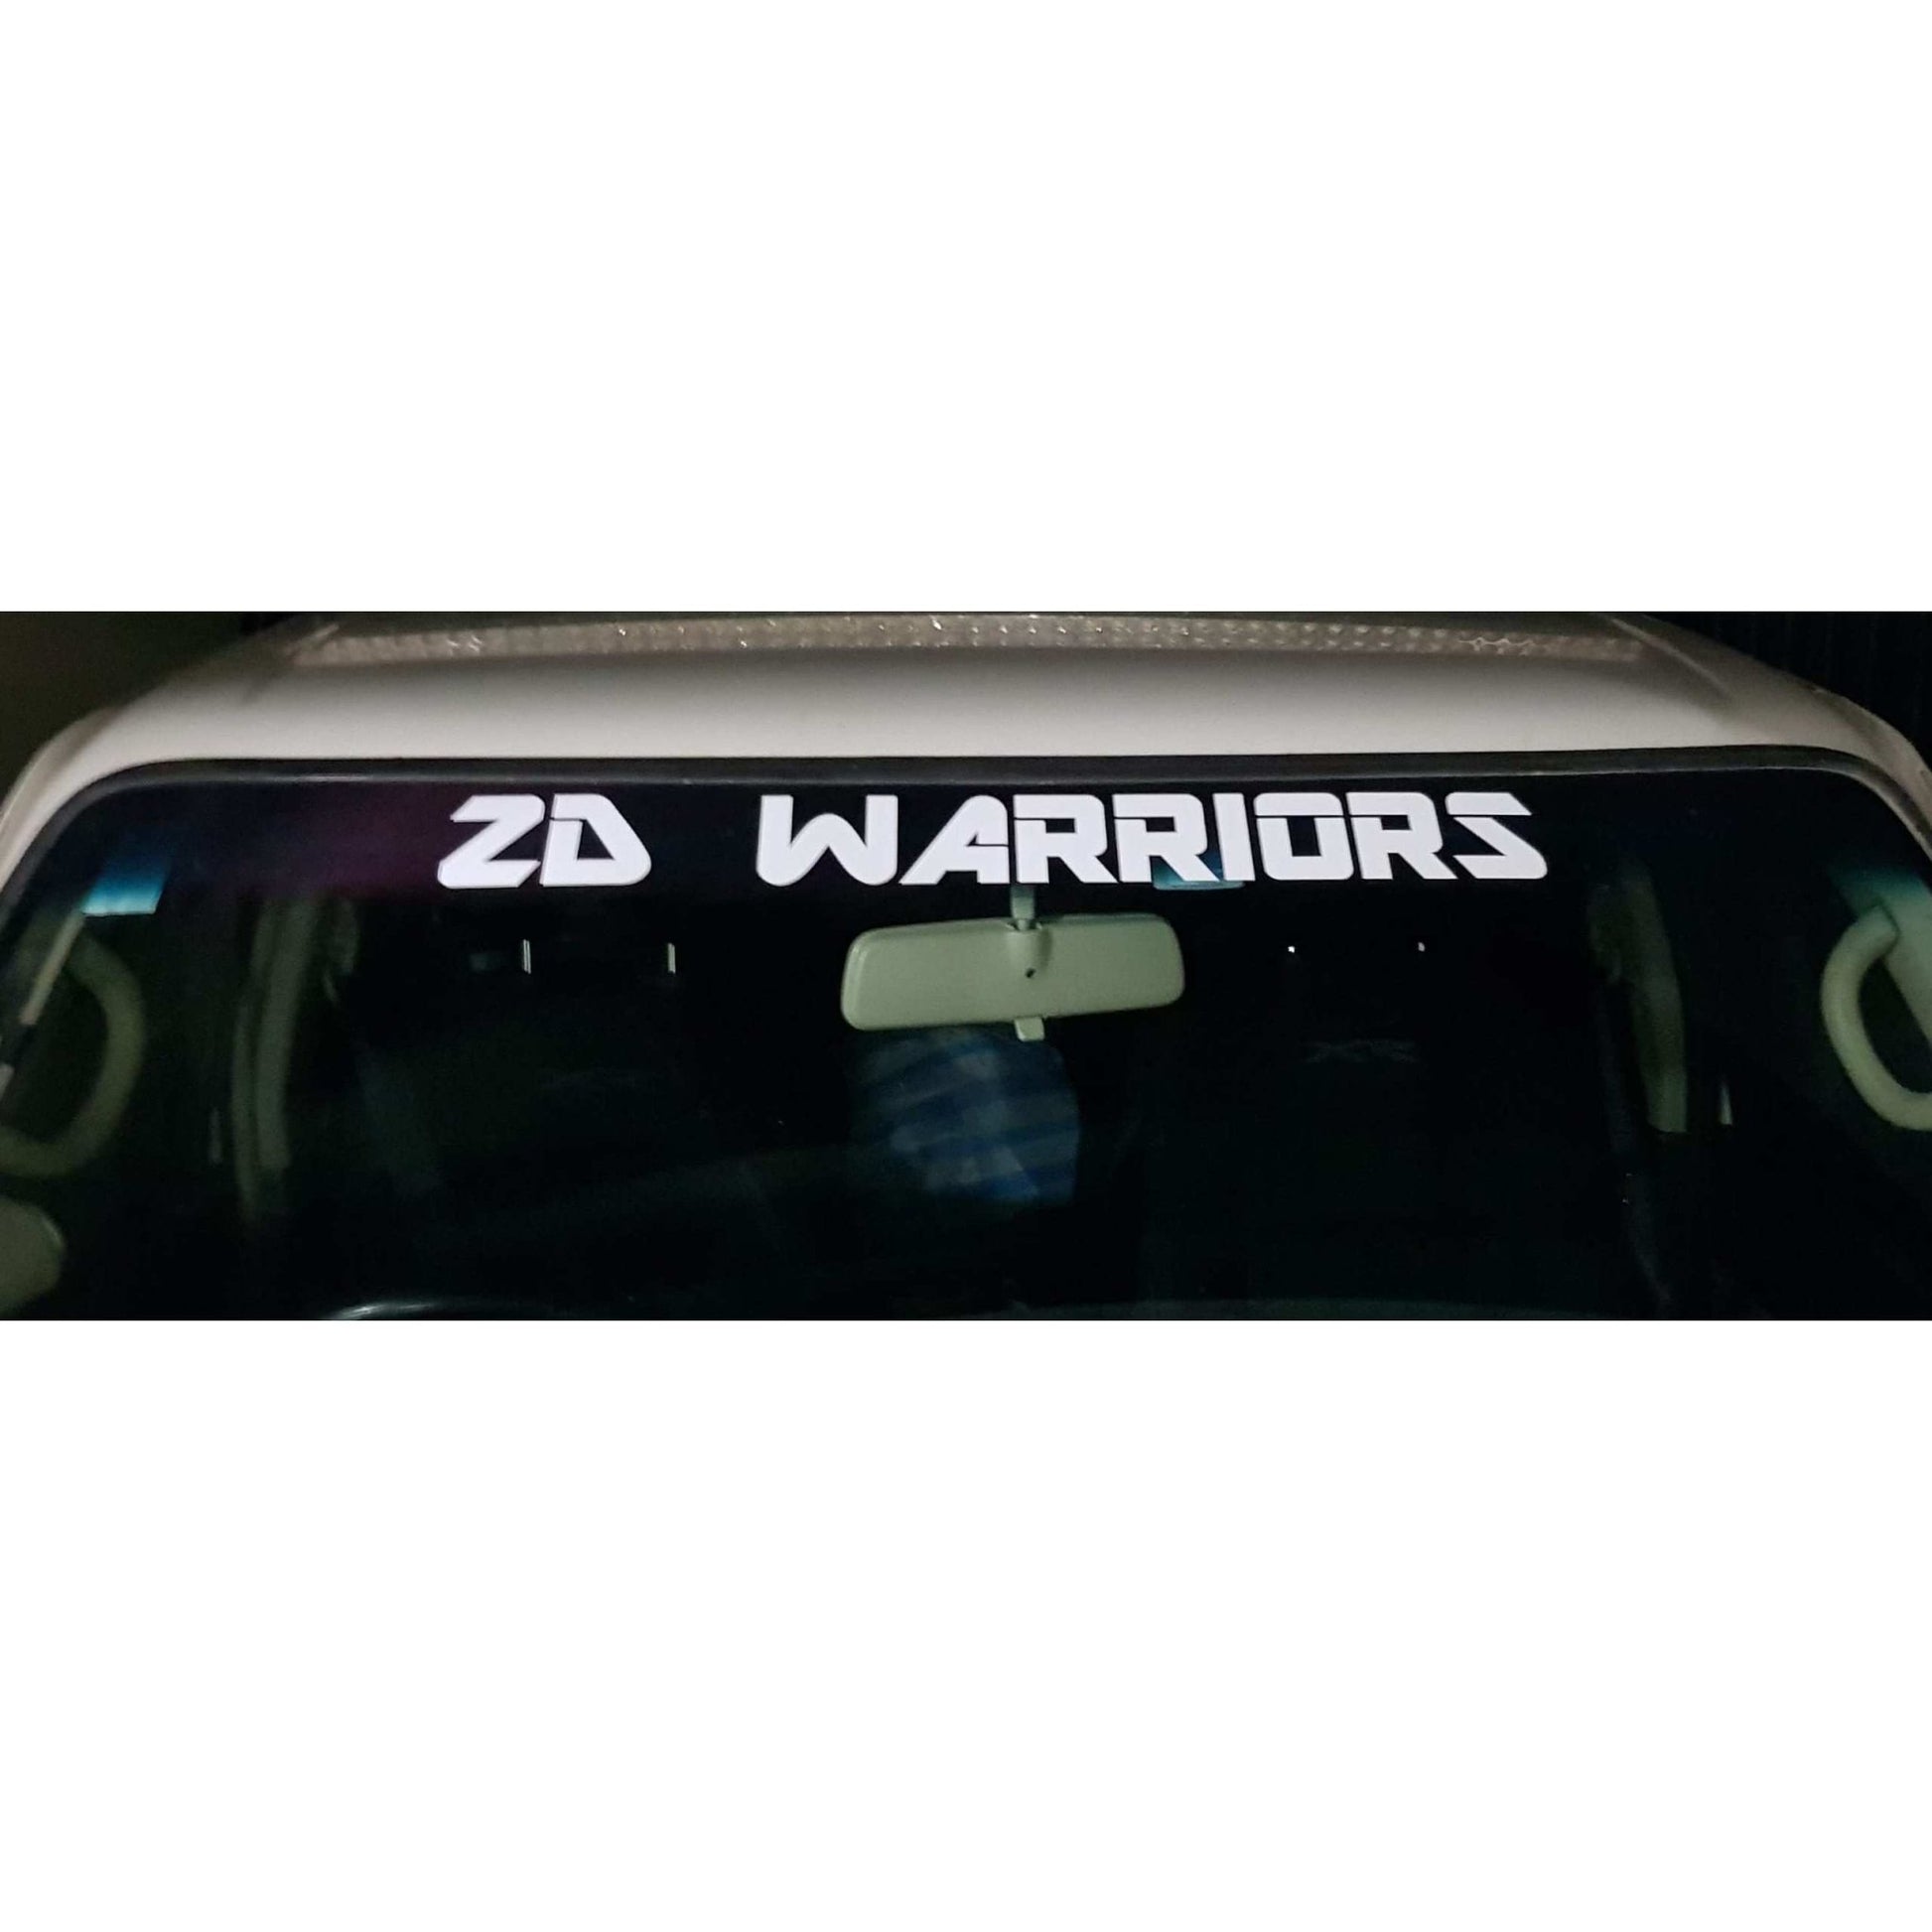 ZD30 WARRIORS PACK - AMD Touring